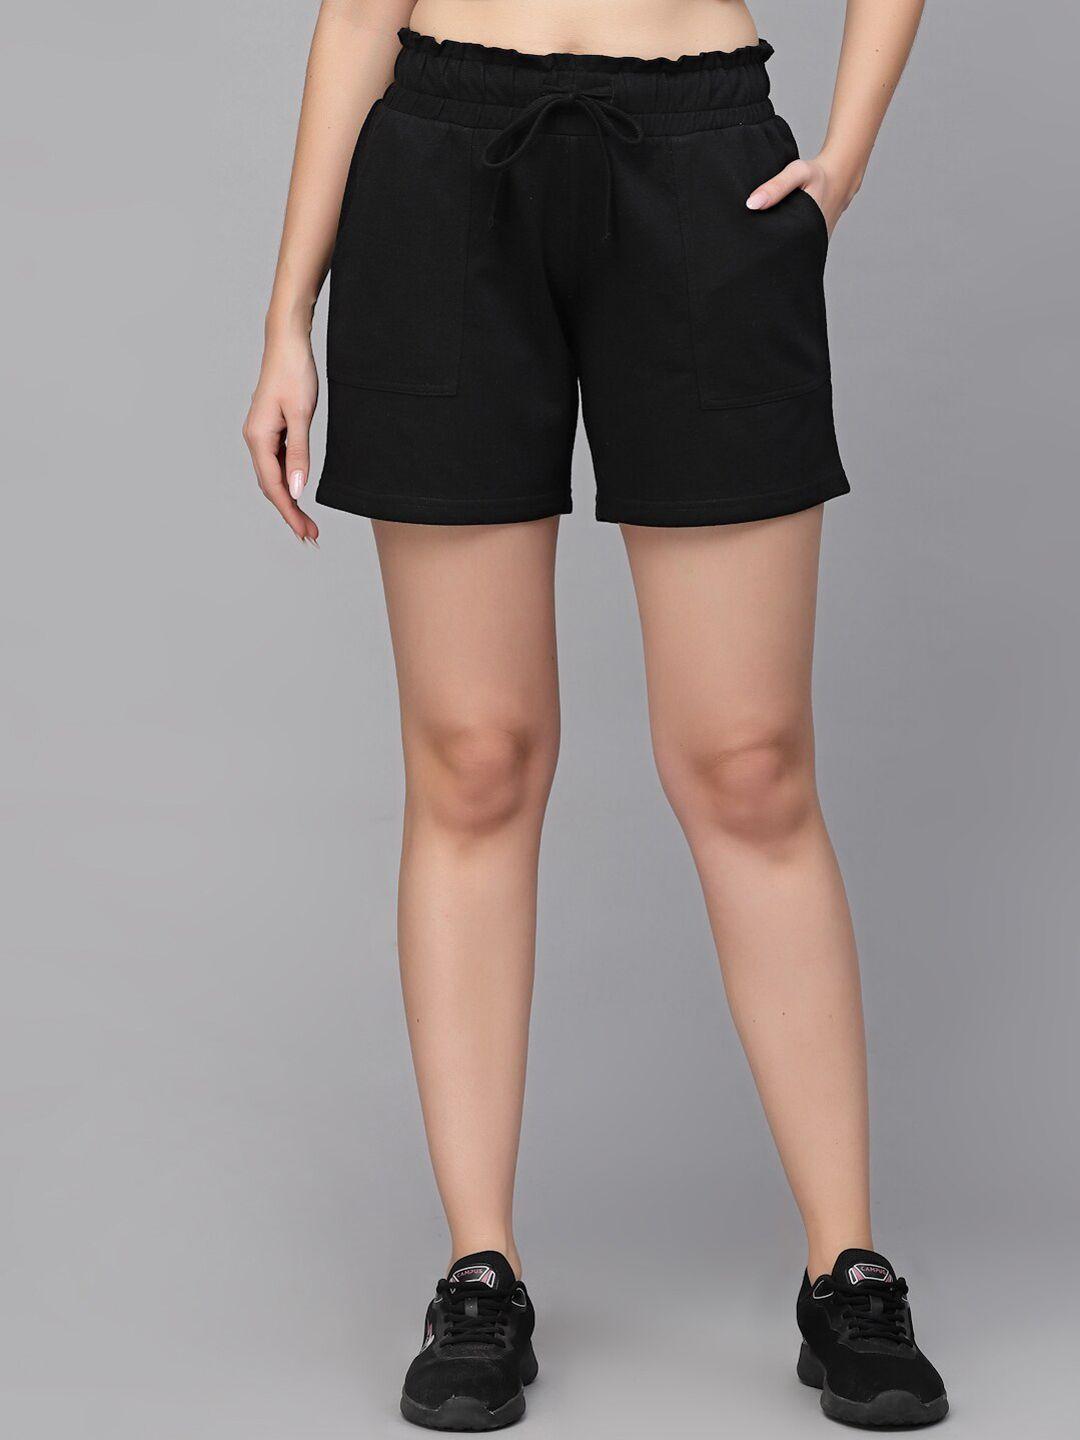 strong-and-brave-women-odour-free-cotton-mid-rise-shorts